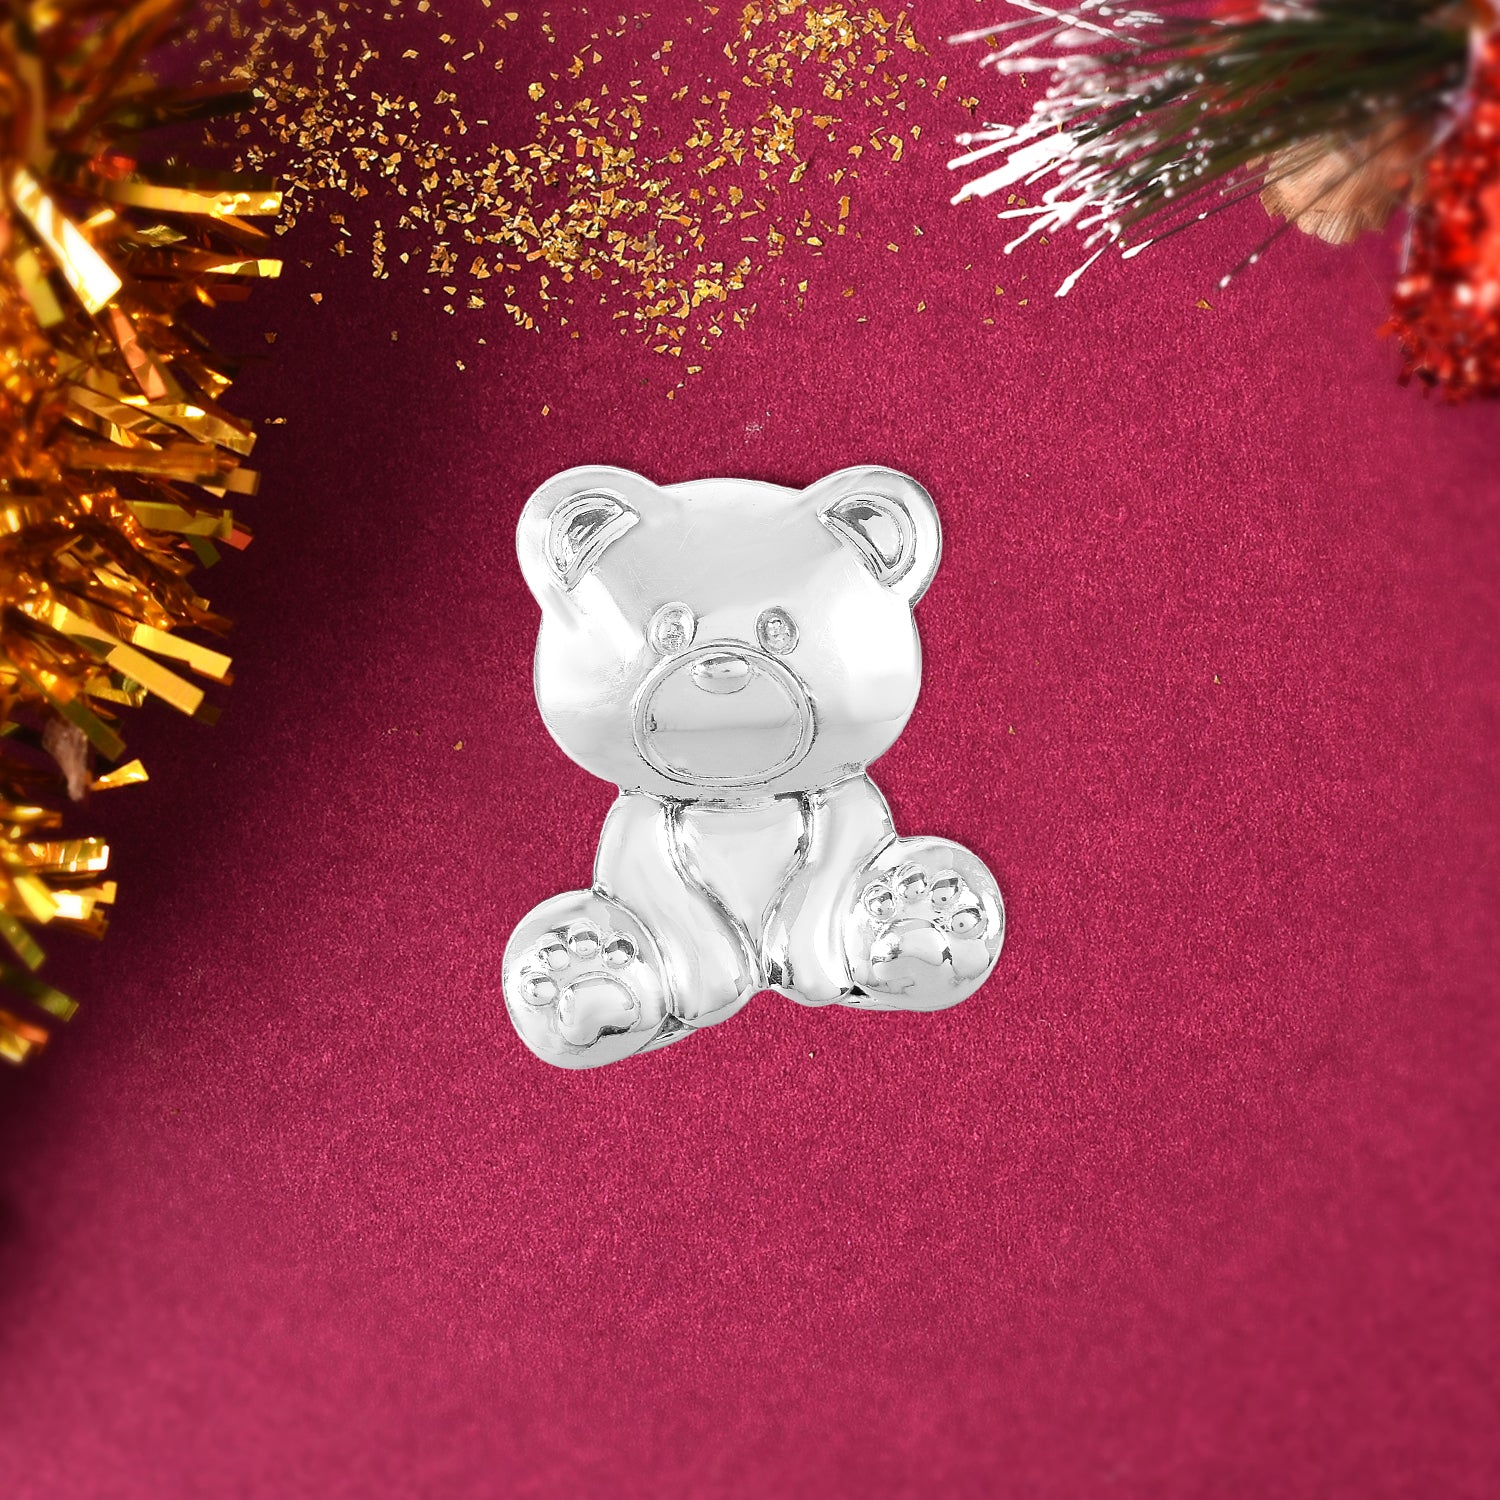 Valentines's Silver Teddy With Greeting Card